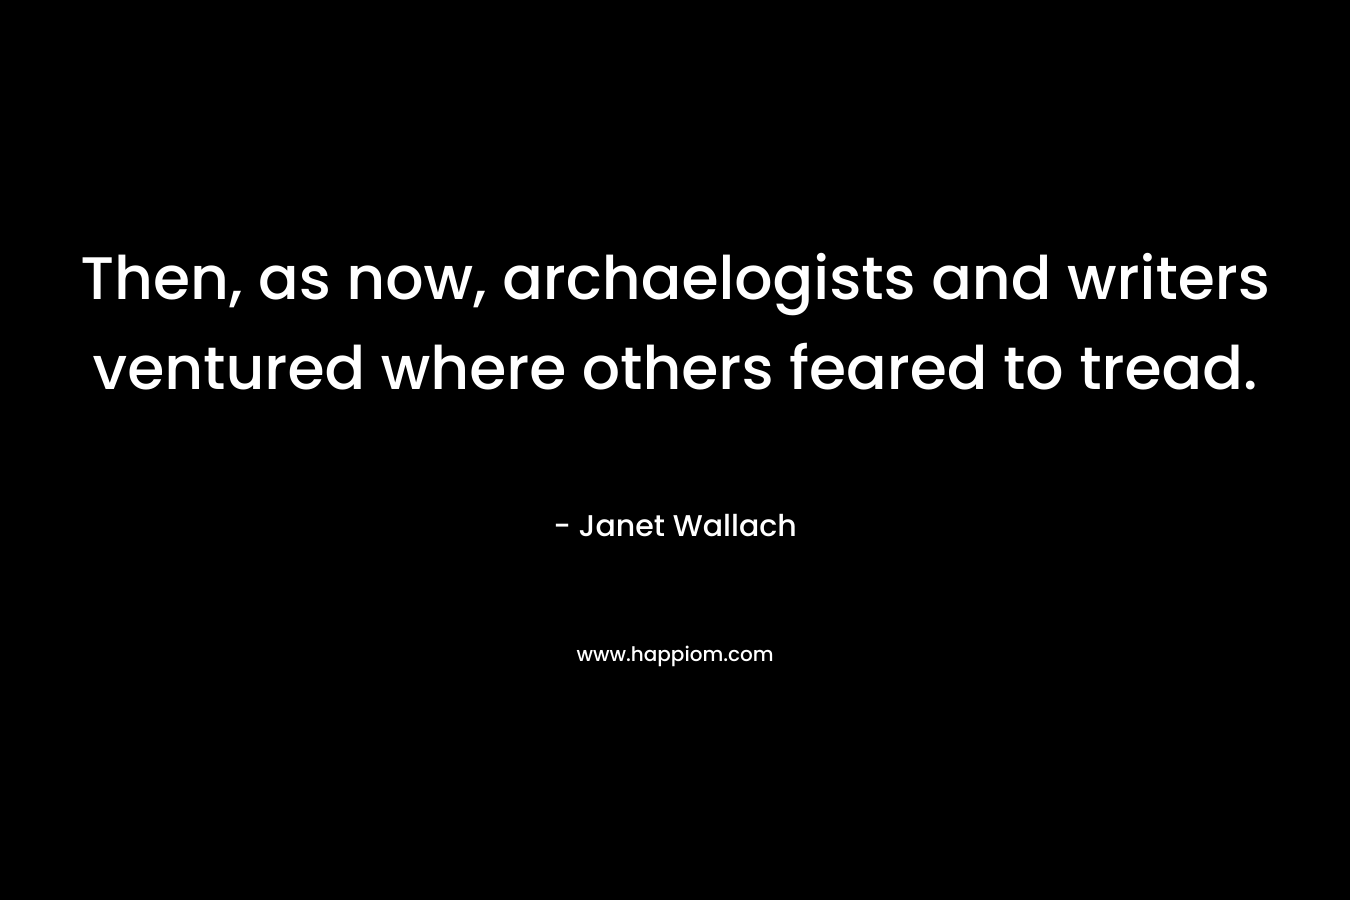 Then, as now, archaelogists and writers ventured where others feared to tread. – Janet Wallach